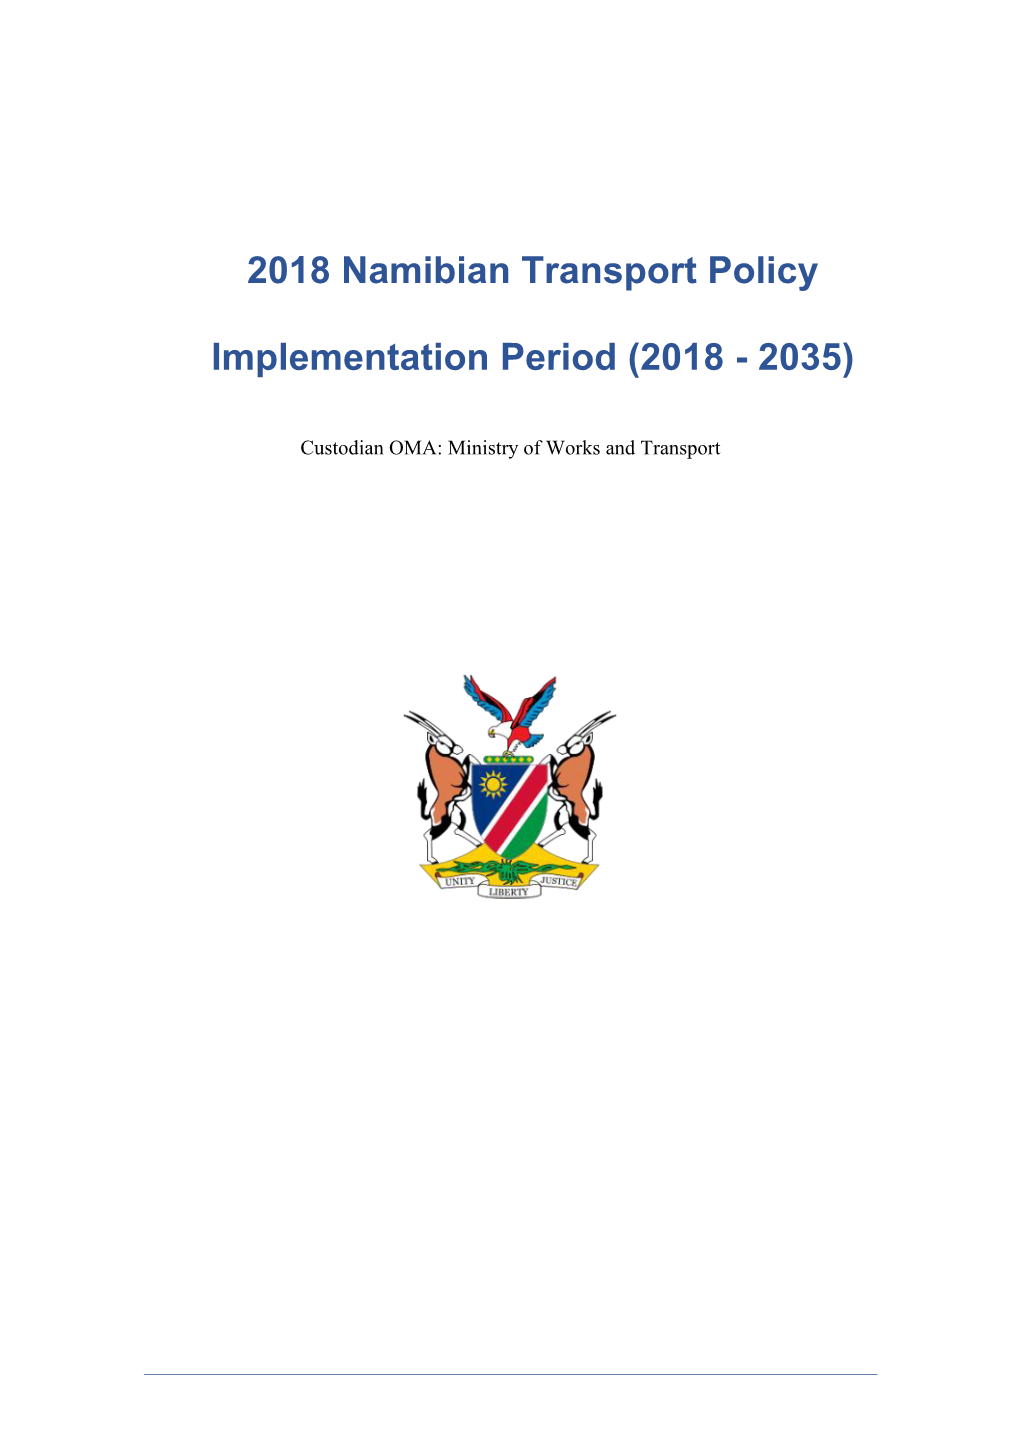 Namibian Transport Policy Implementation Period